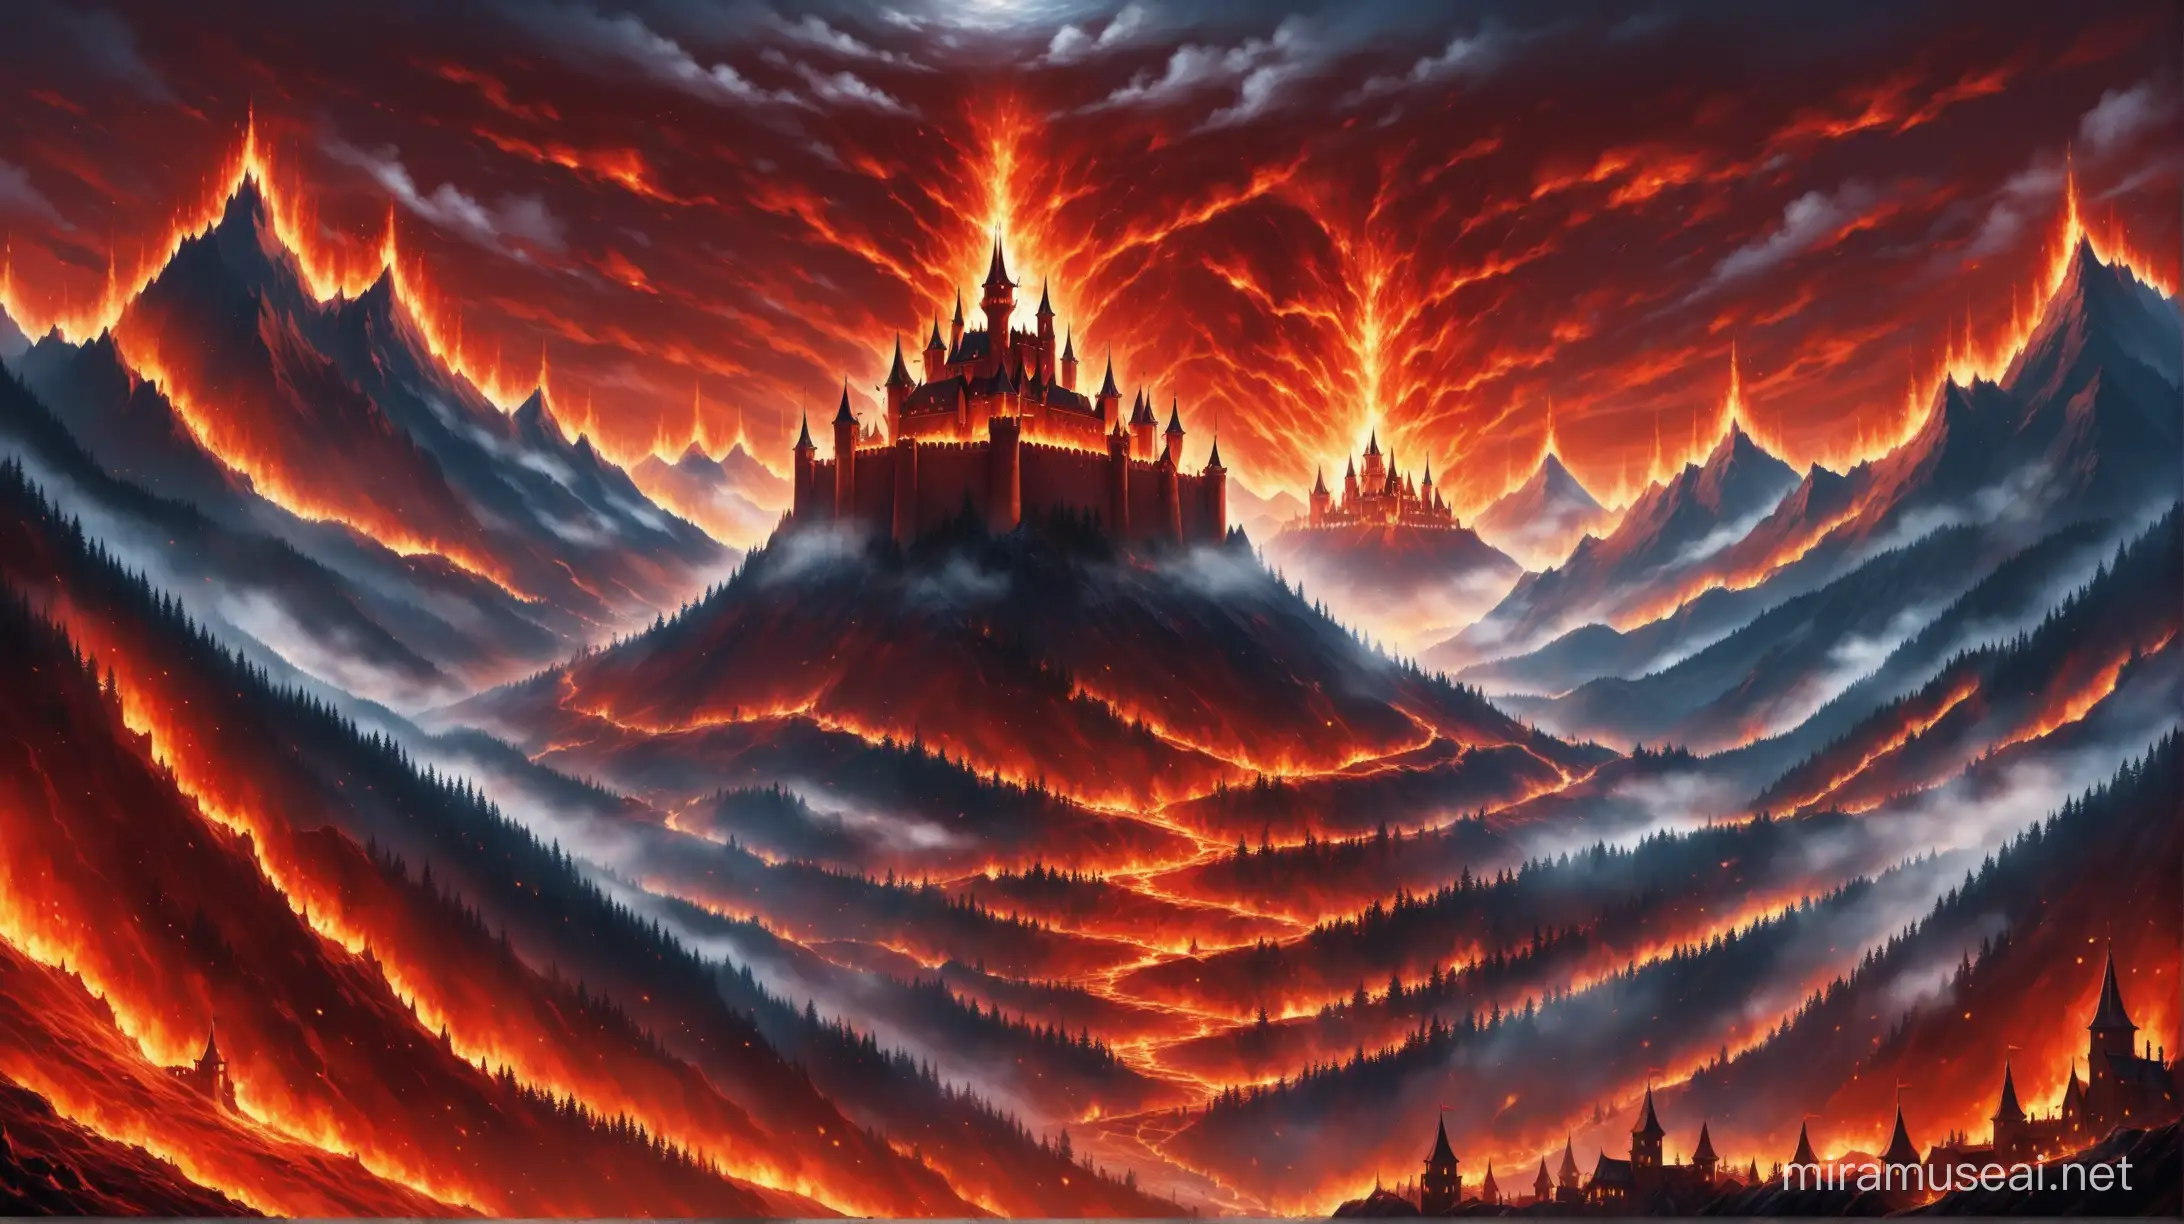 hell scene with mountain and castle